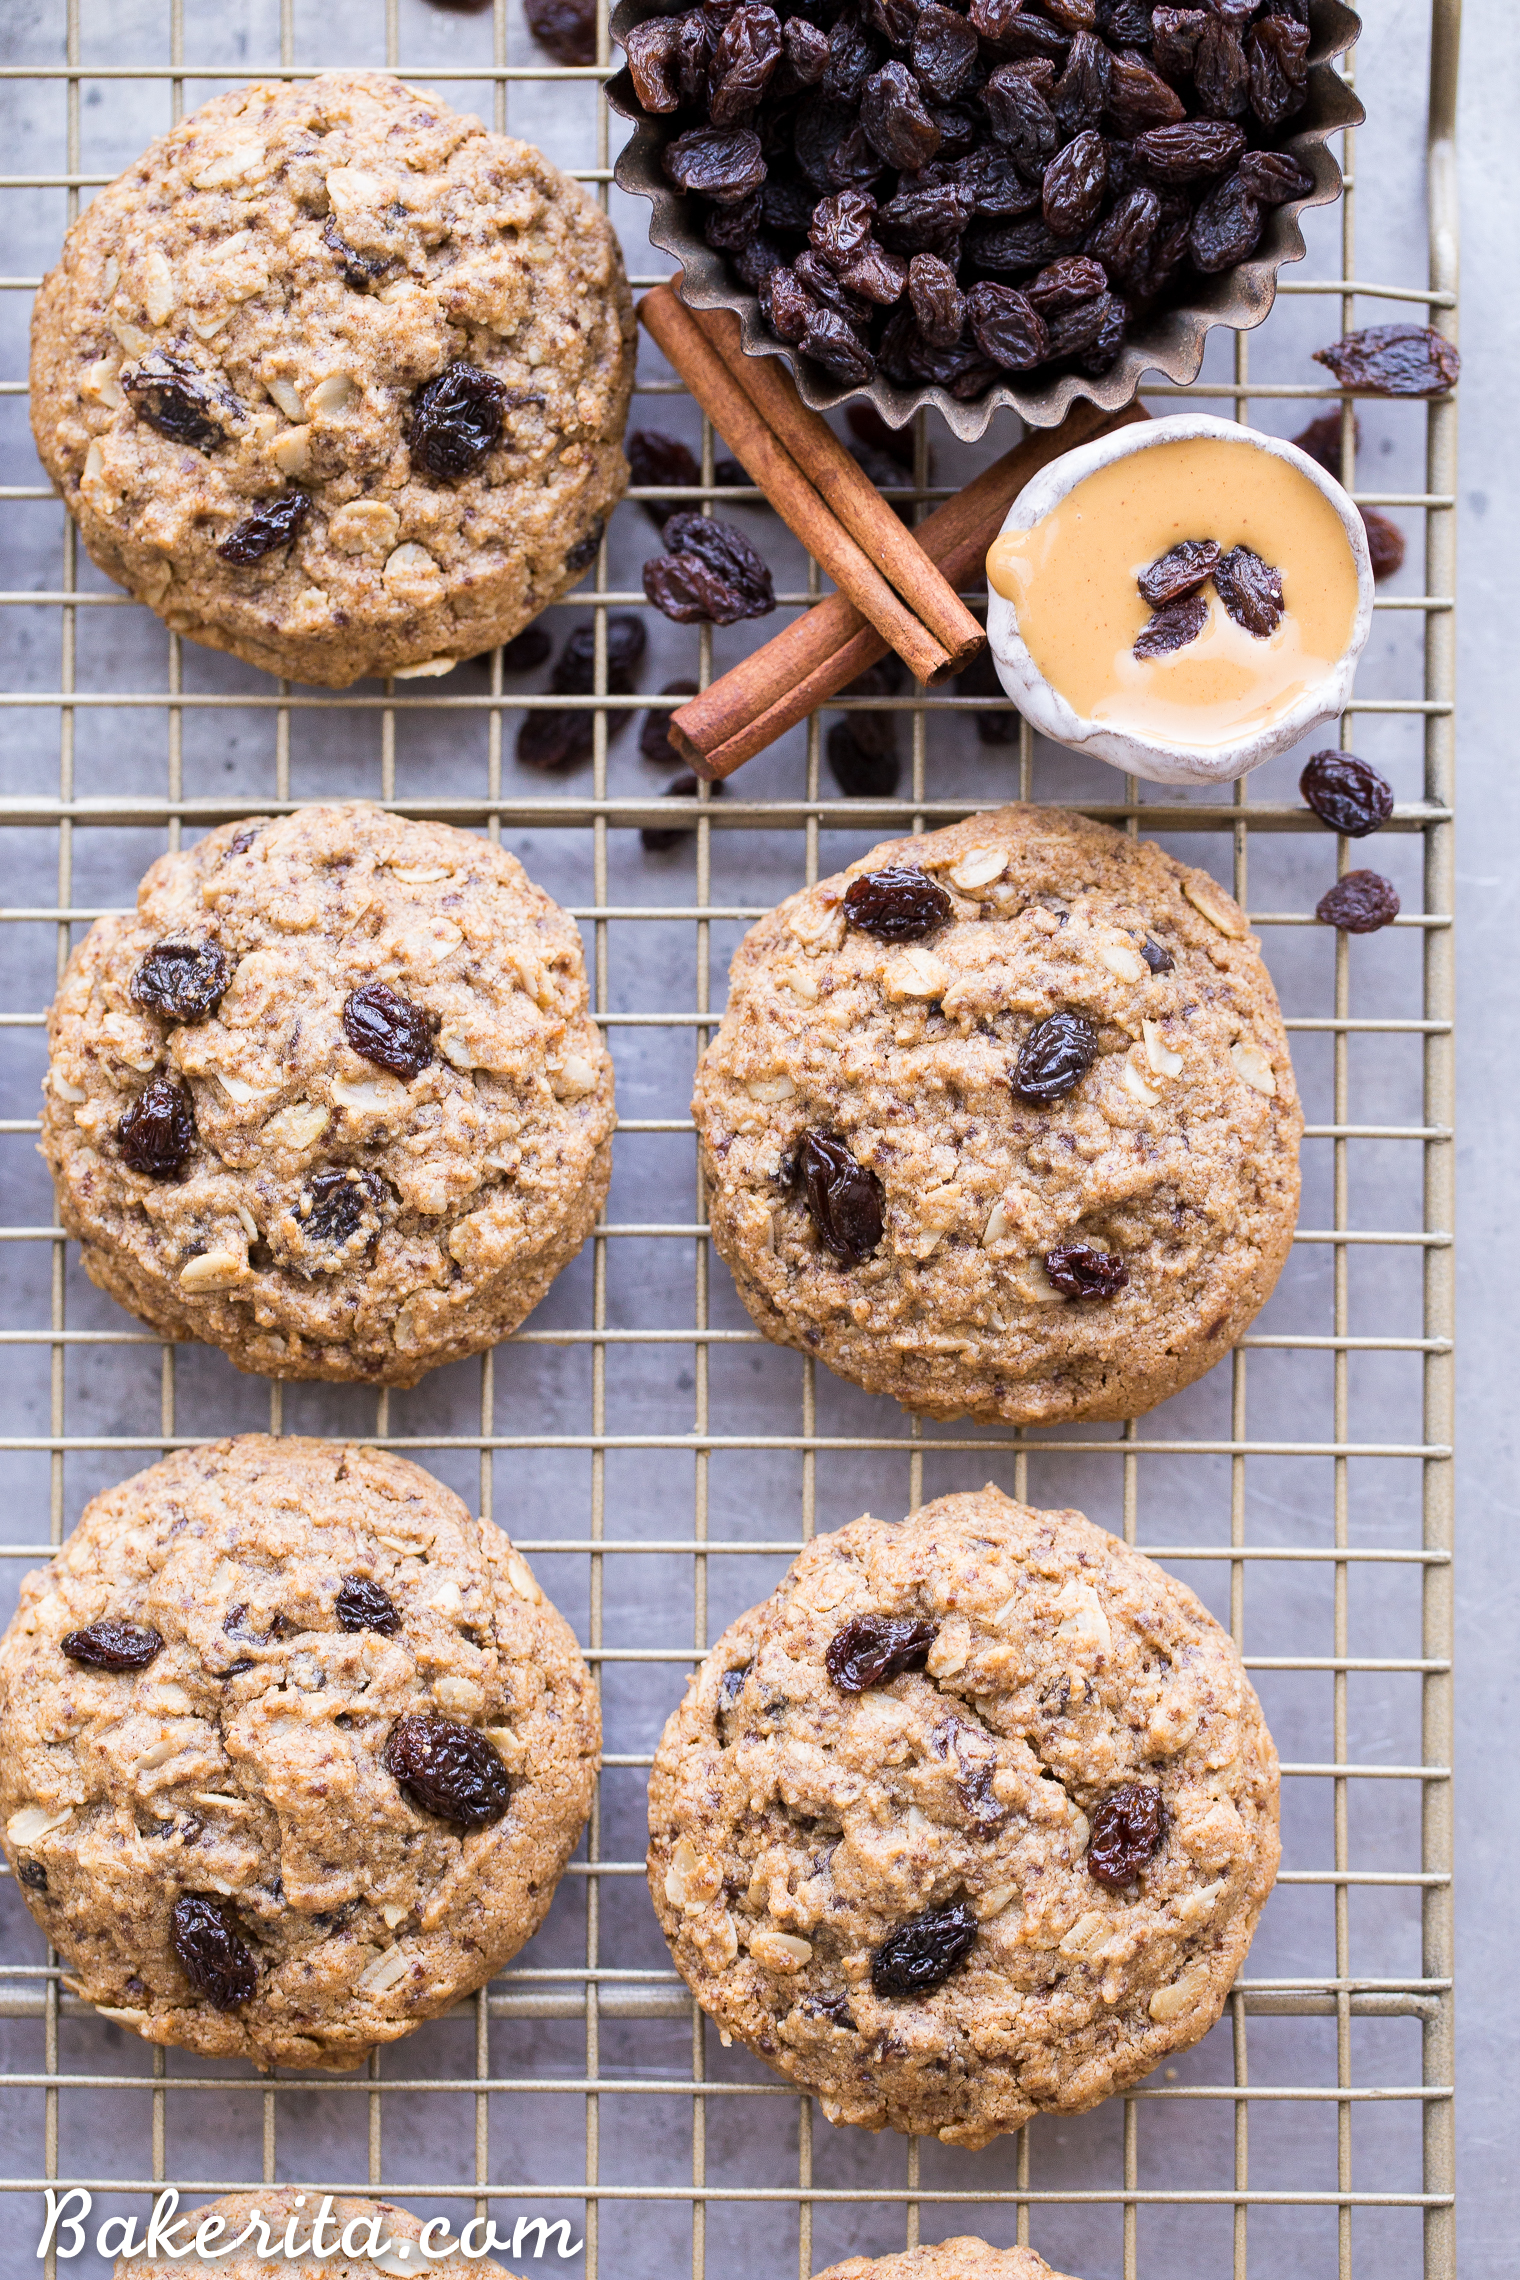 These Peanut Butter Oatmeal Raisin Cookies are the best oatmeal raisin cookies I've ever had! They're incredibly soft and chewy, with crispy edges and MAJOR peanut butter flavor. You won't believe they're gluten-free, refined sugar-free and vegan.